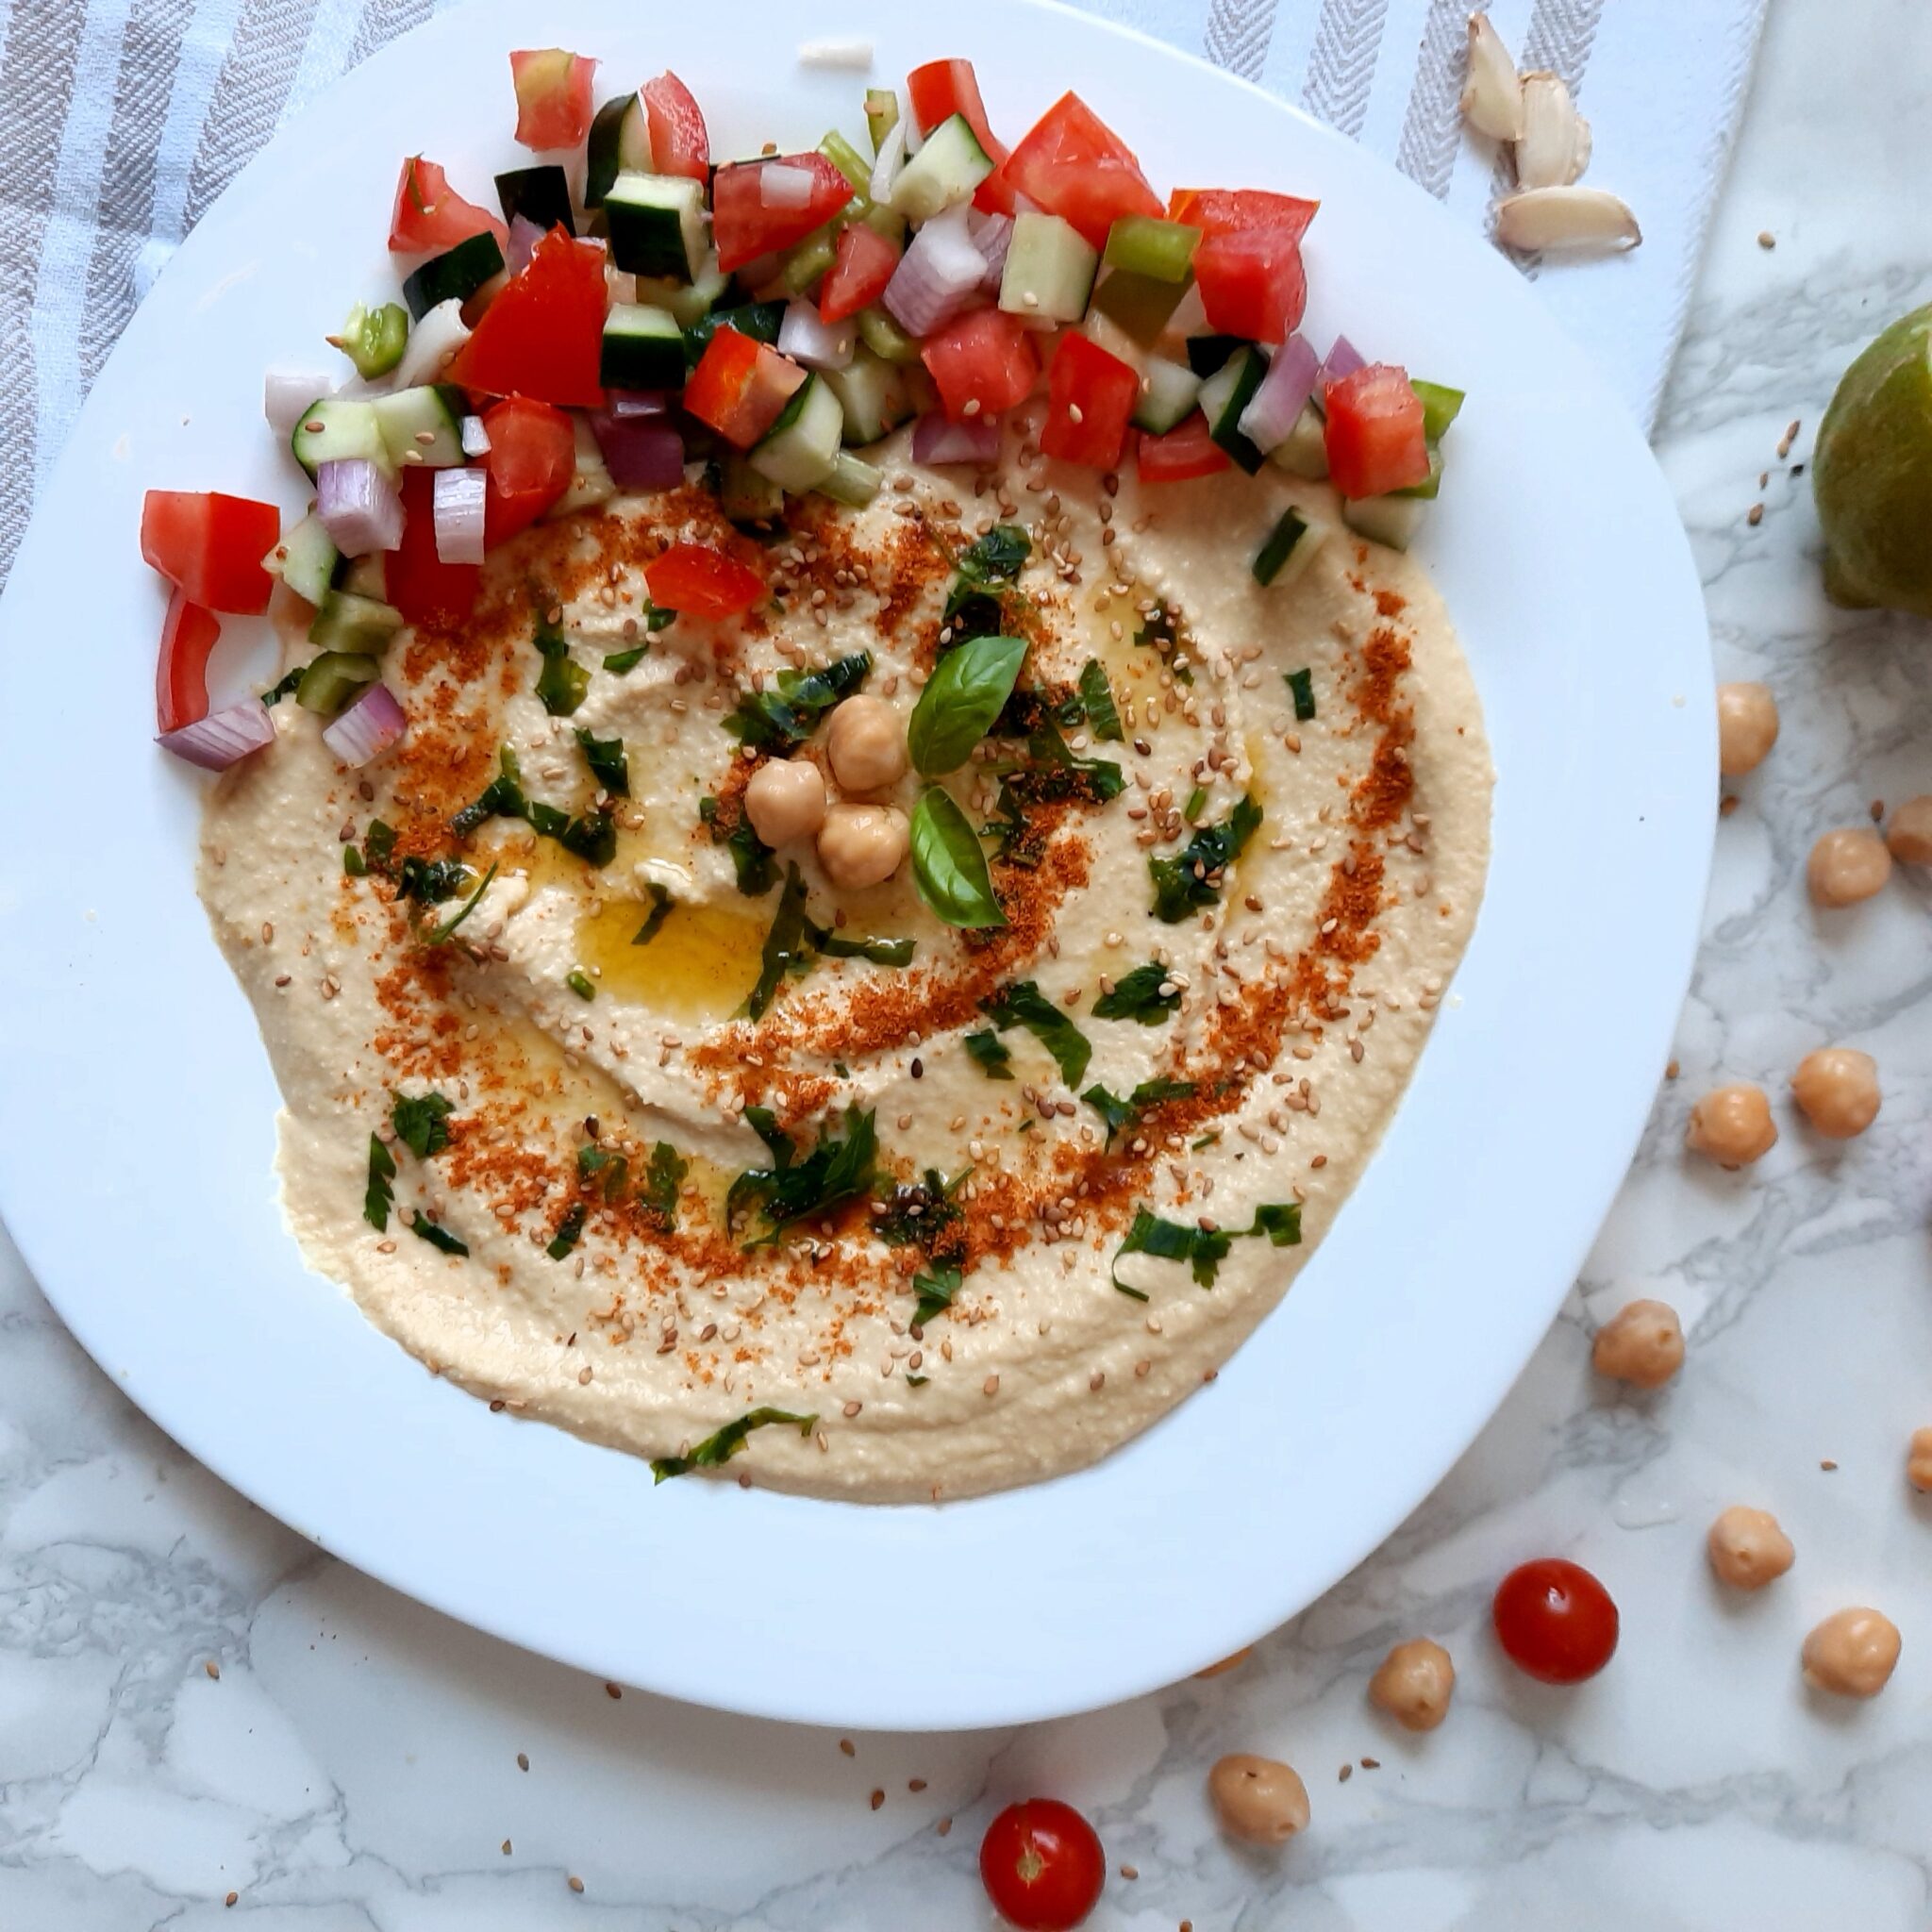 Smooth and Creamy Hummus: A Delicious Middle Eastern Dip